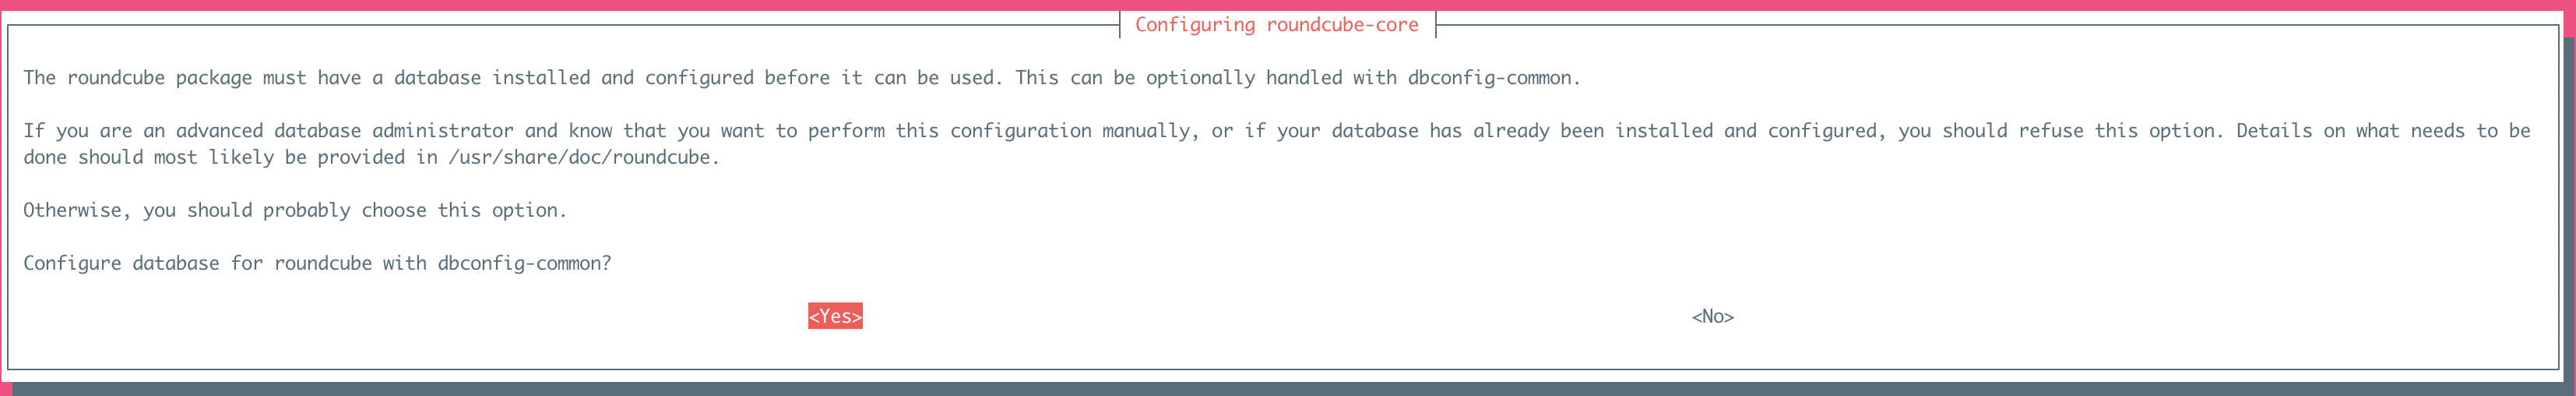 Configure database for roundcube with dbconfig-common? <-- Yes